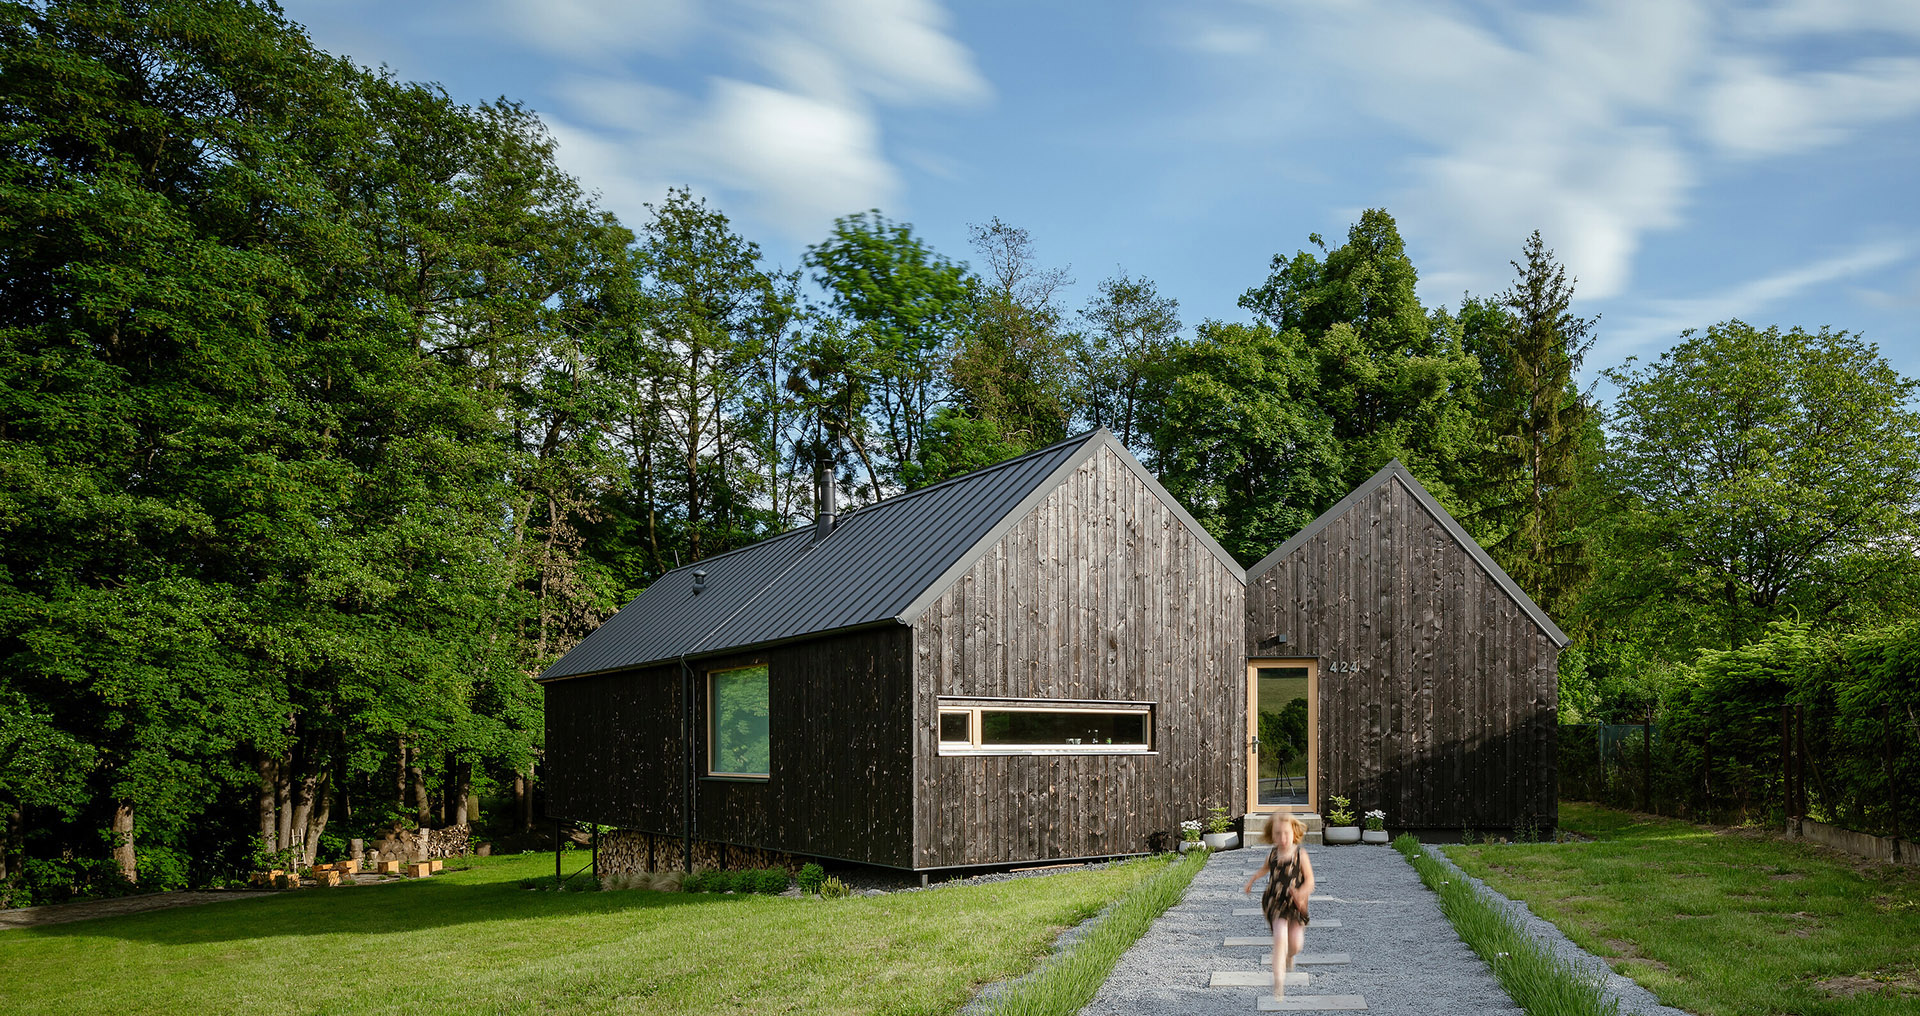 New construction of a single-family home with in-law suite made of wood intended to be self-built